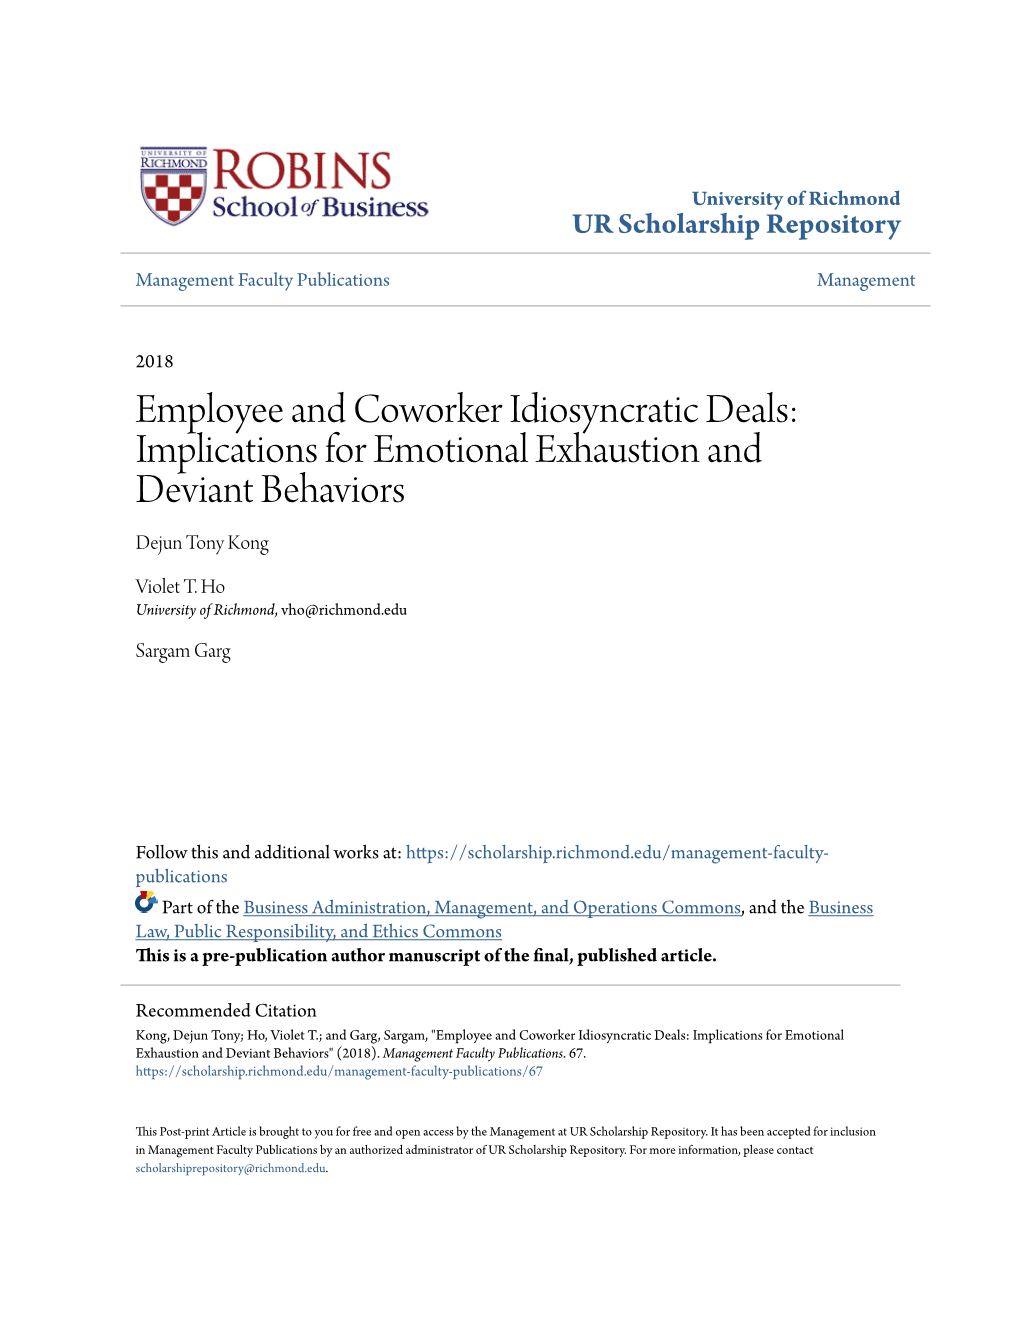 Employee and Coworker Idiosyncratic Deals: Implications for Emotional Exhaustion and Deviant Behaviors Dejun Tony Kong